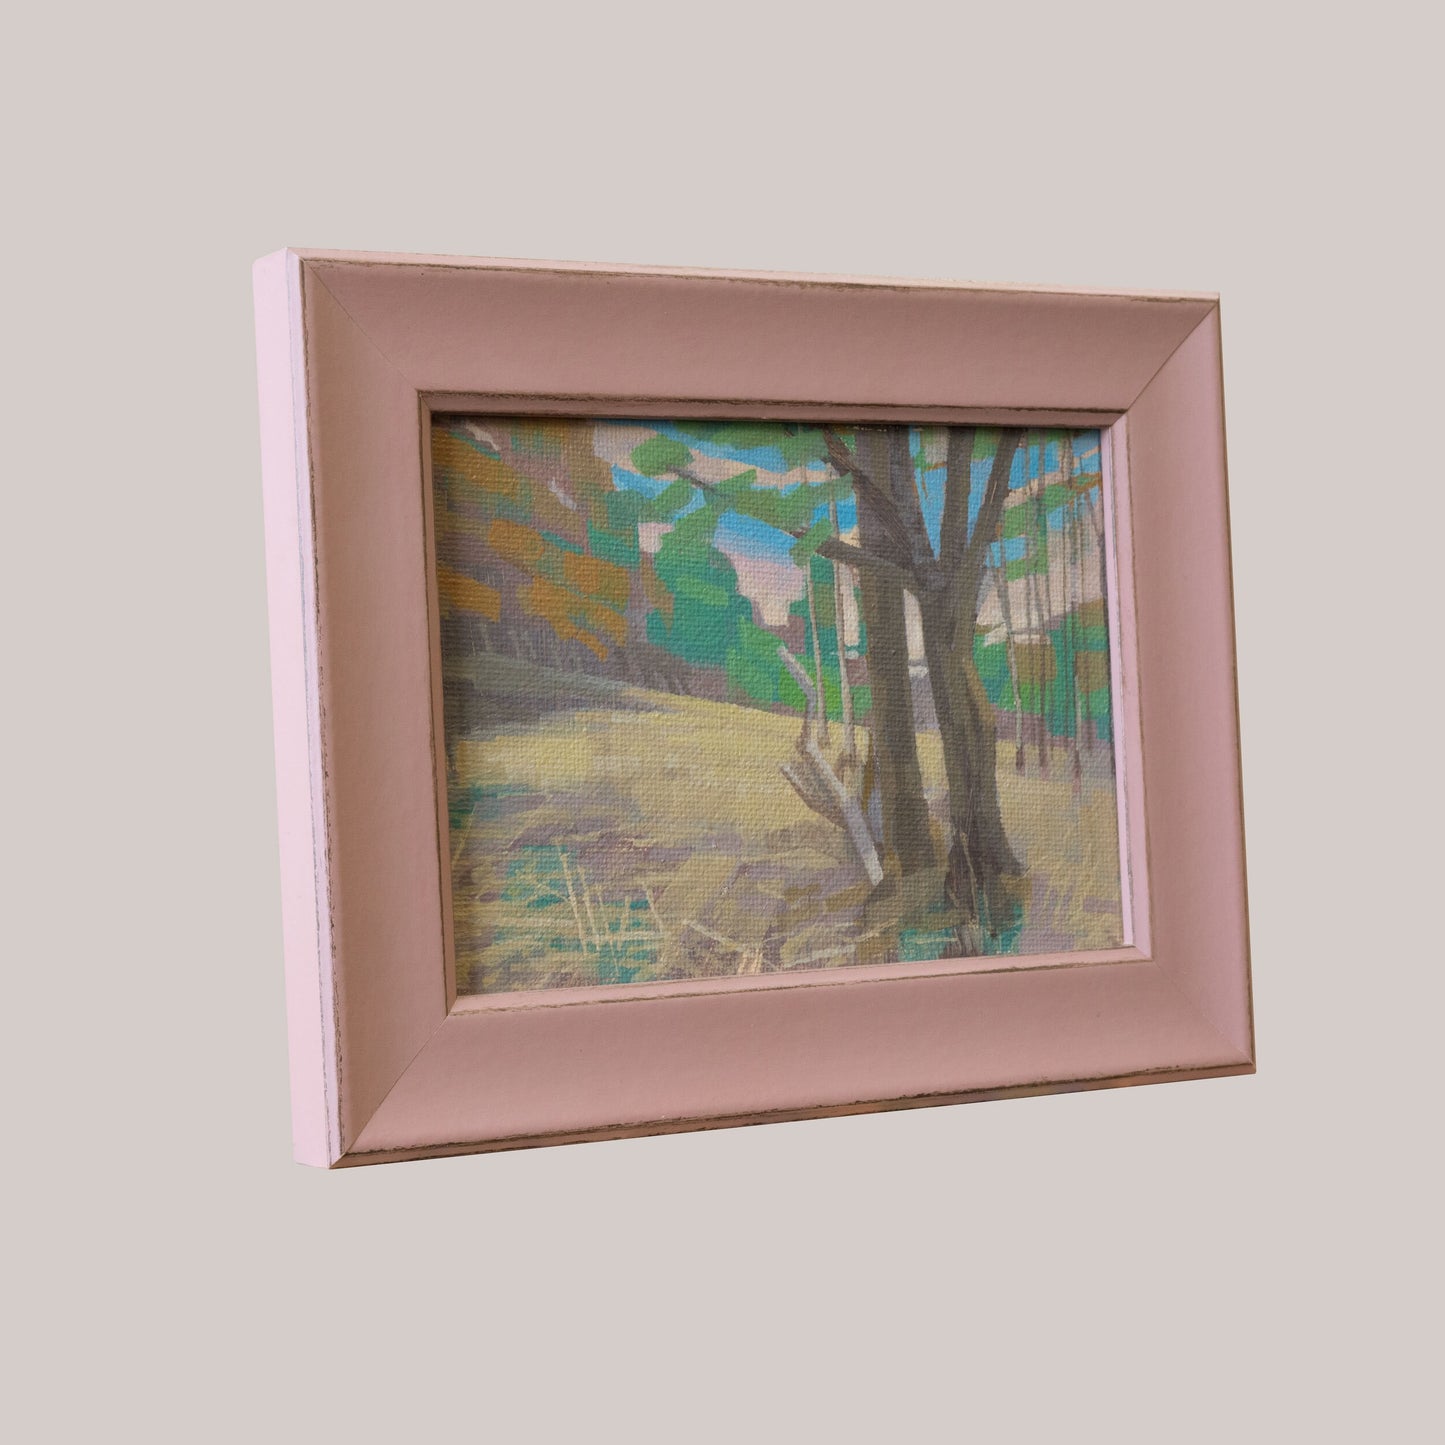 Original painting - "Clearing" - hand painted - acrylic painting - 10x15 cm - landscape picture - unique piece - with frame